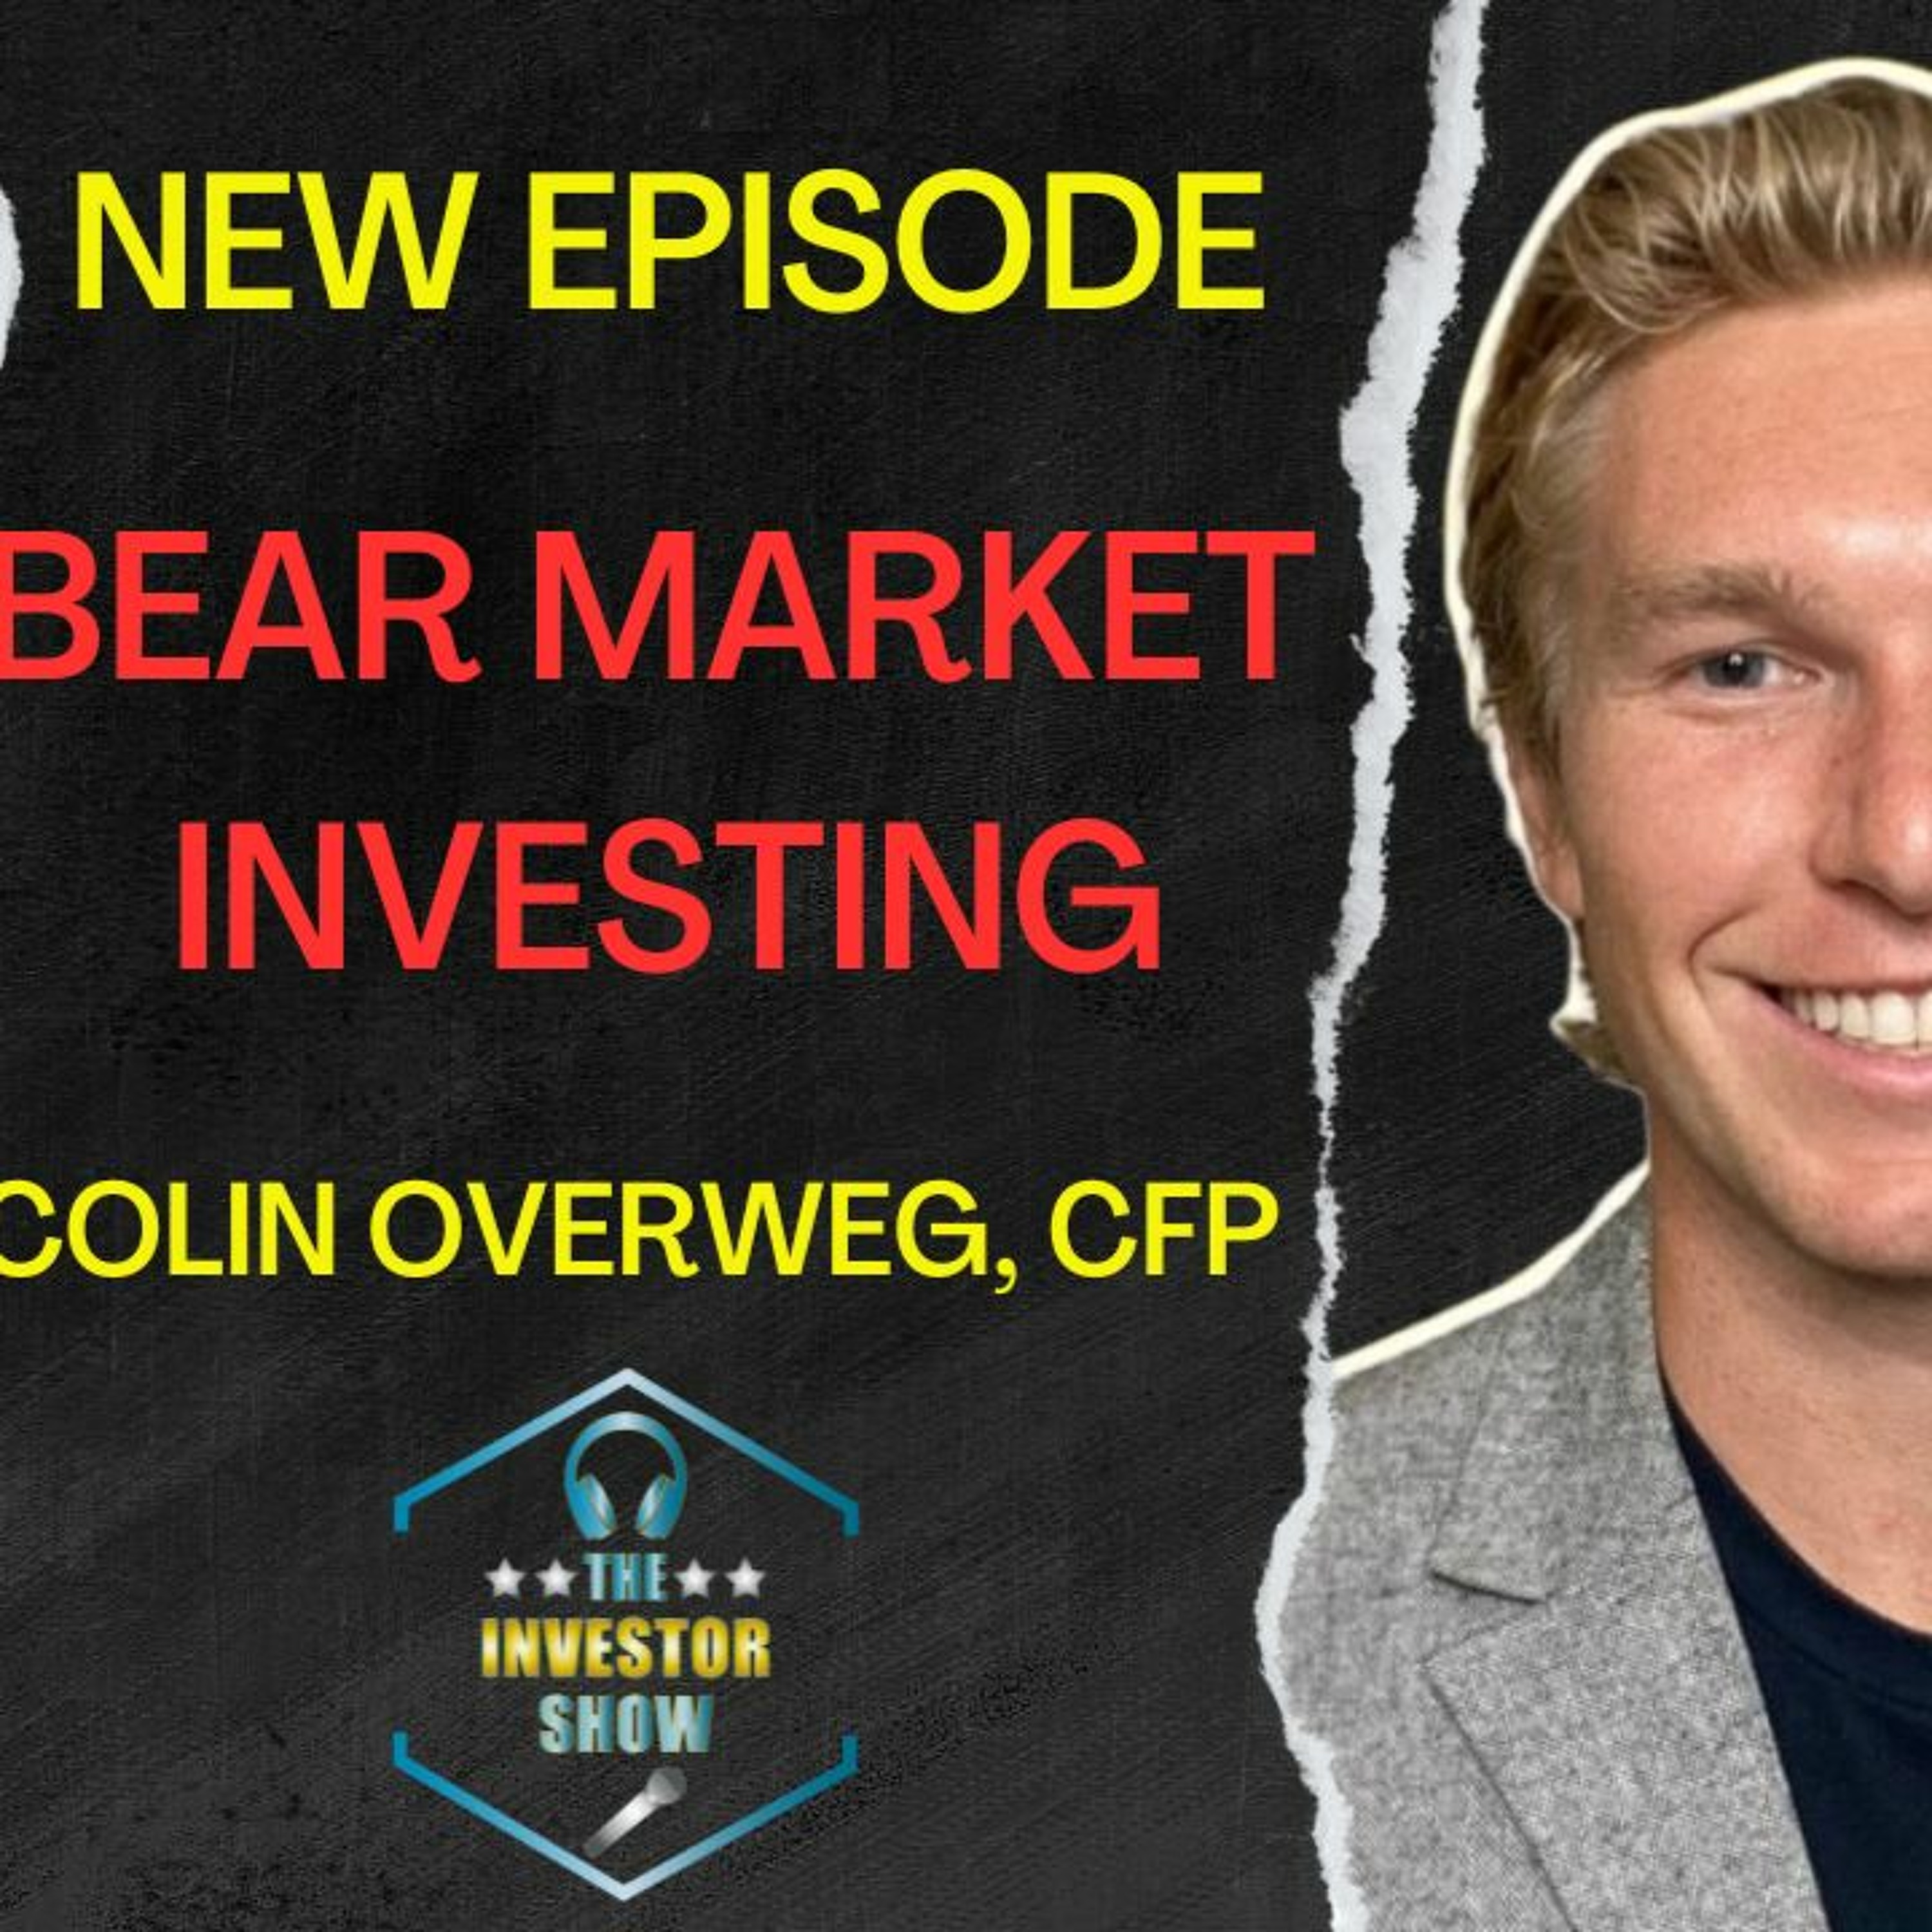 Bear Market investing with Colin Overweg, CFP